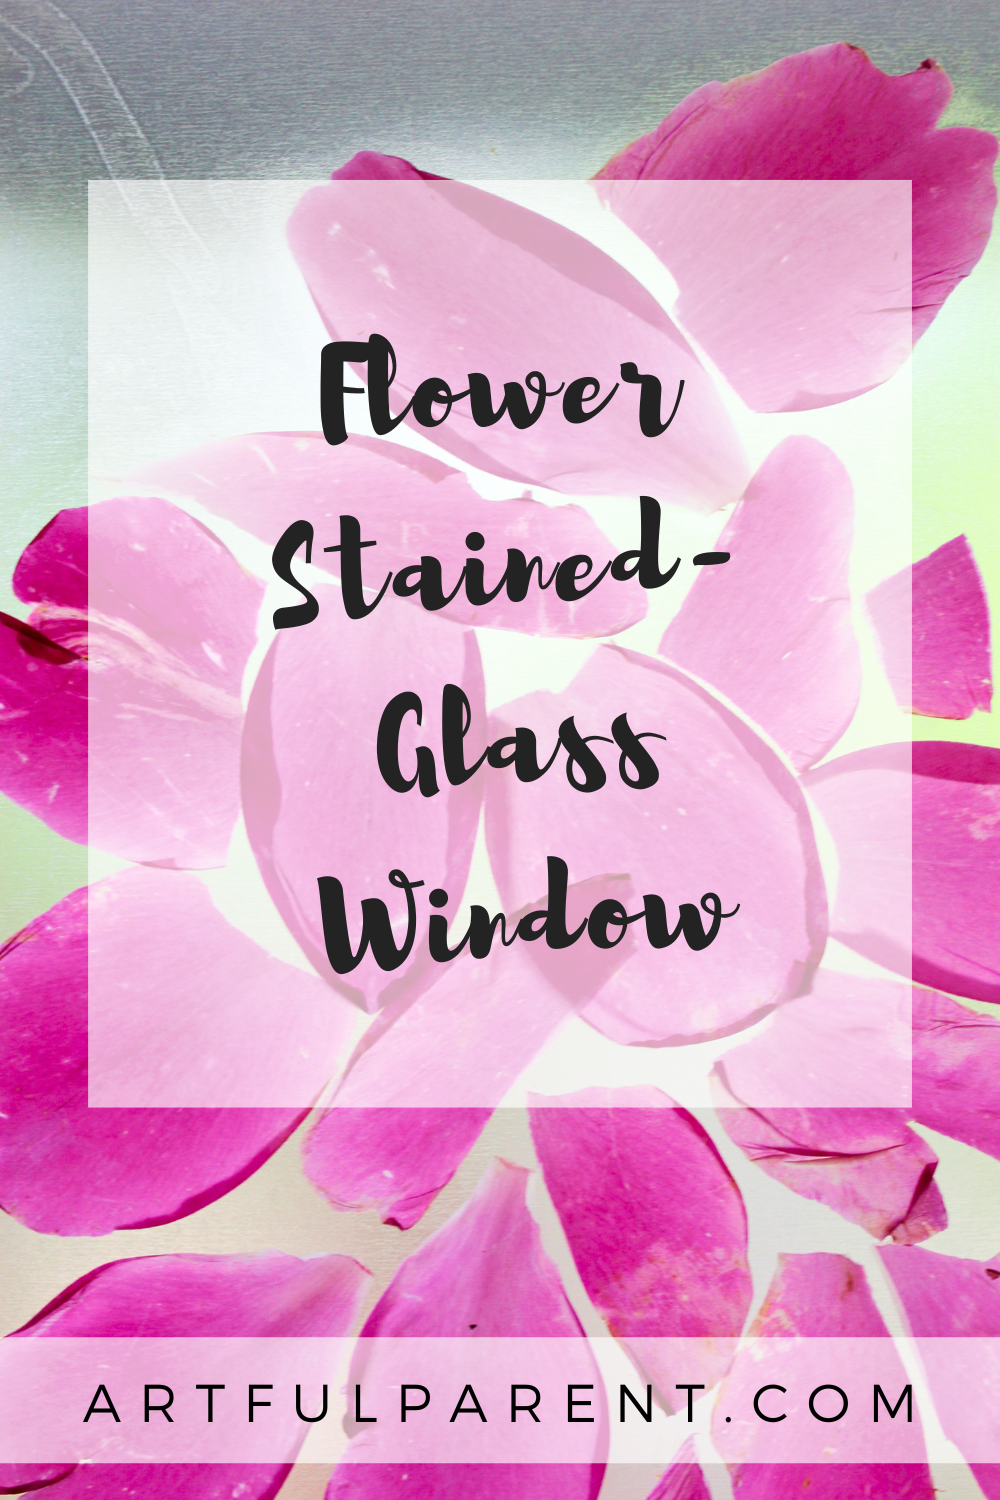 How to Make a Flower Stained-Glass Window